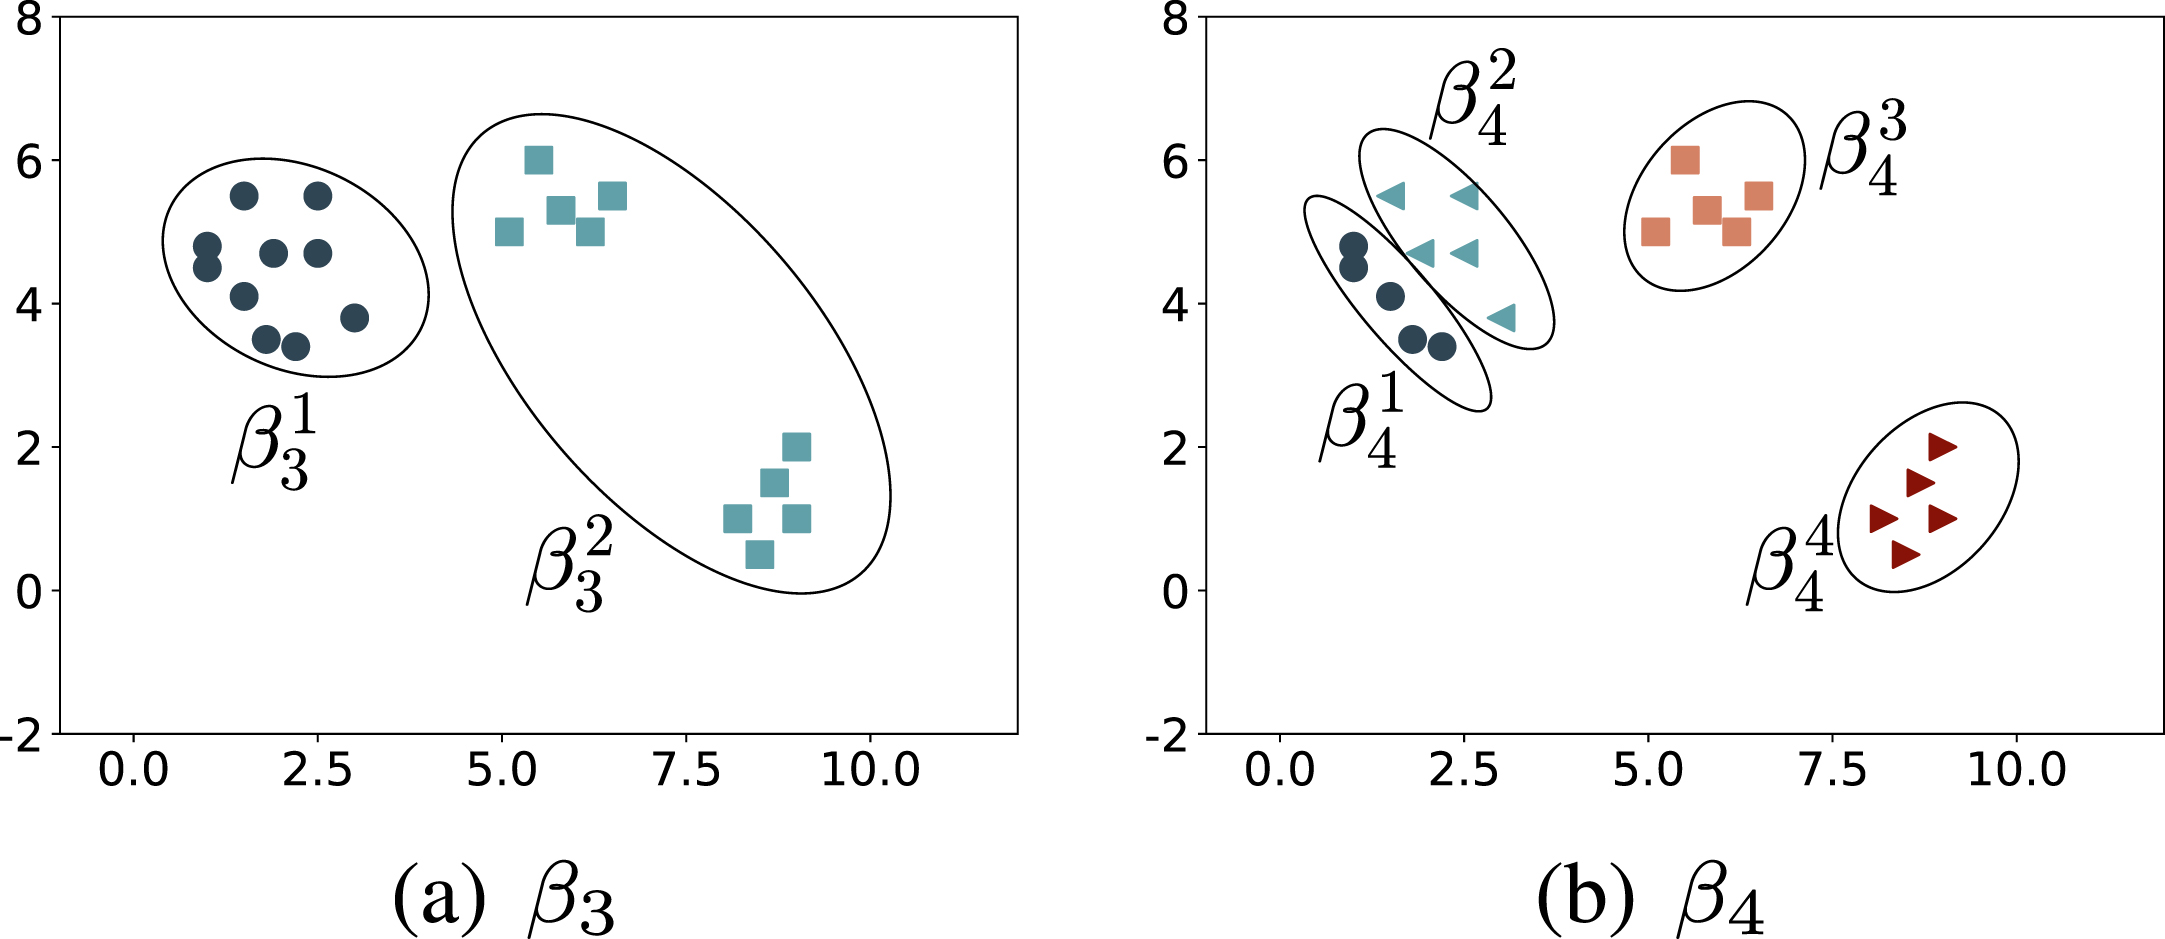 Two exemplar base clusterings β3 and β4 in dataset D2.